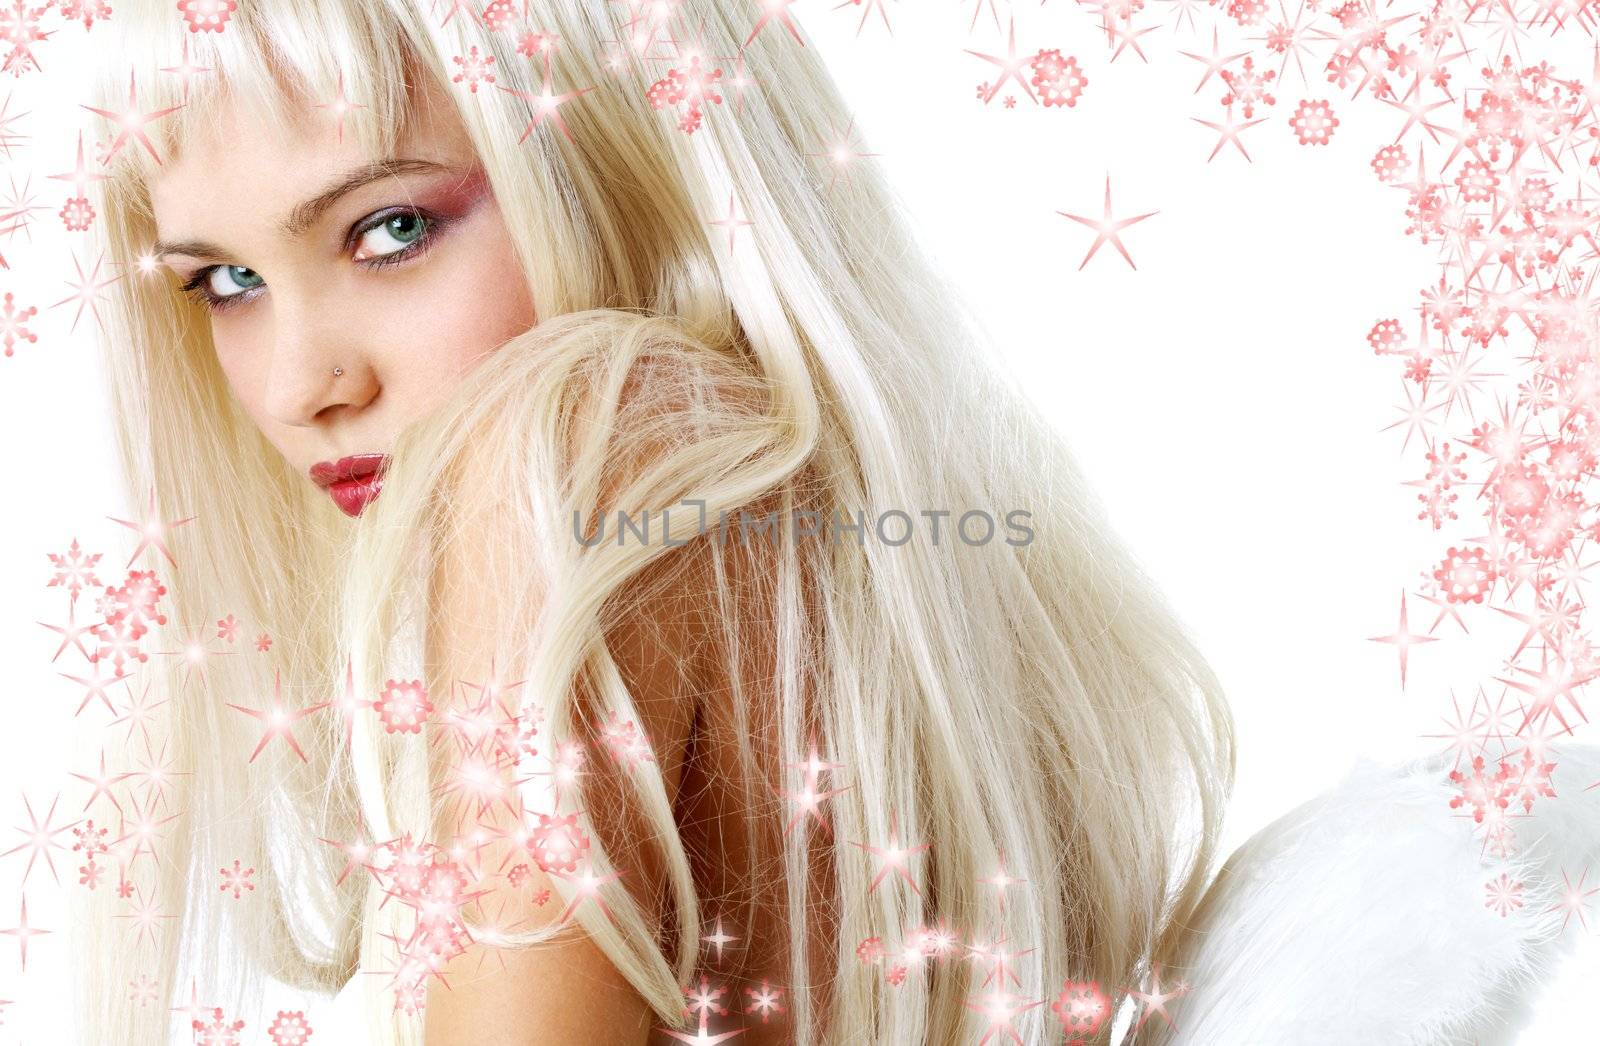 portrait of lovely blond with angel wings surrounded by rendered snowflakes